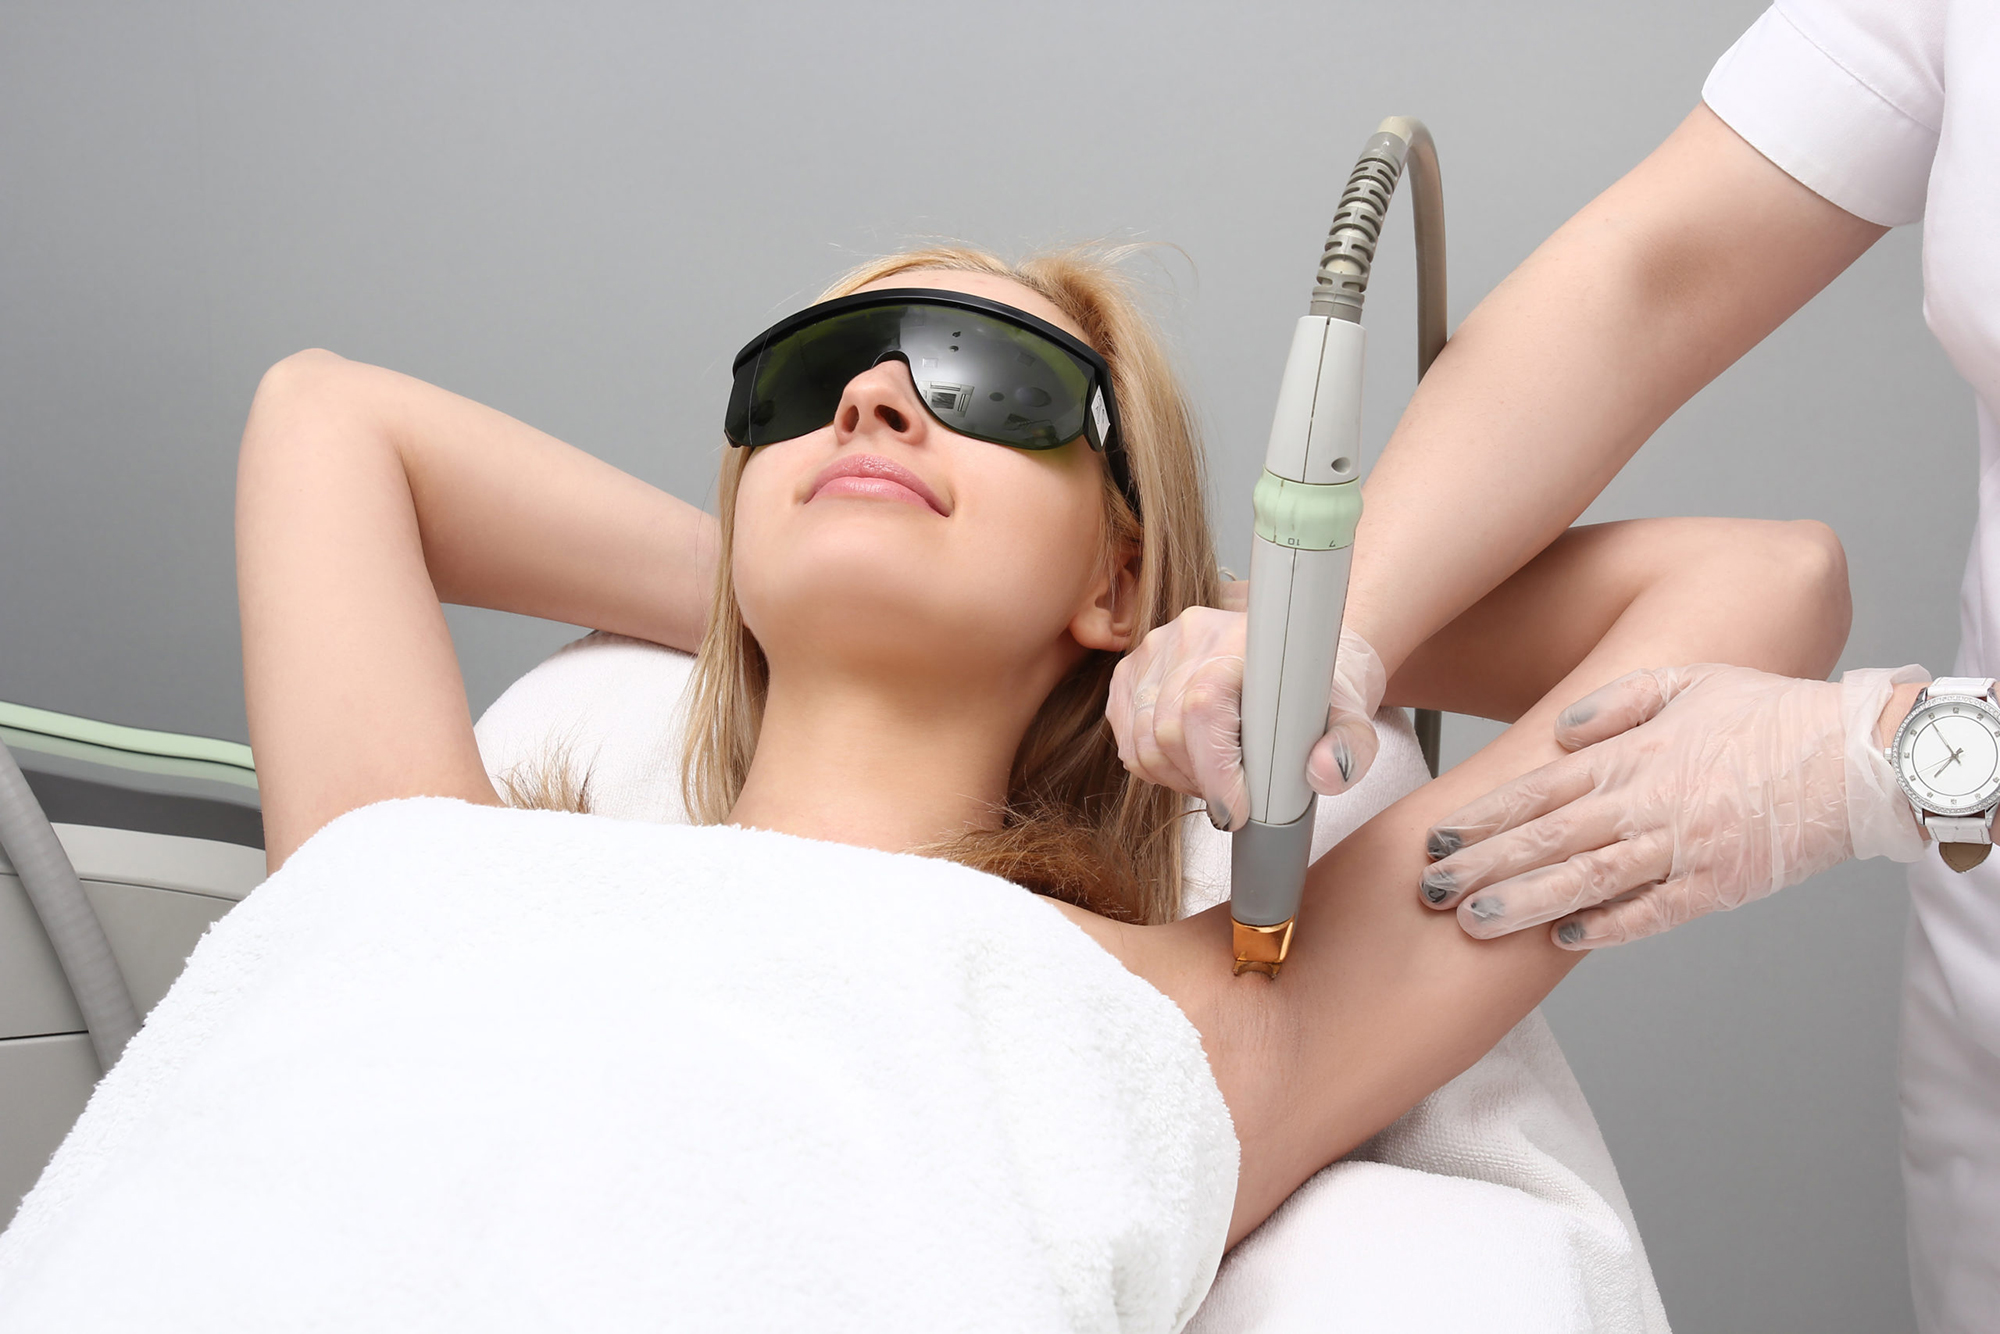 kaydermatology Services Laser hair Removal In Burbank CA Frist